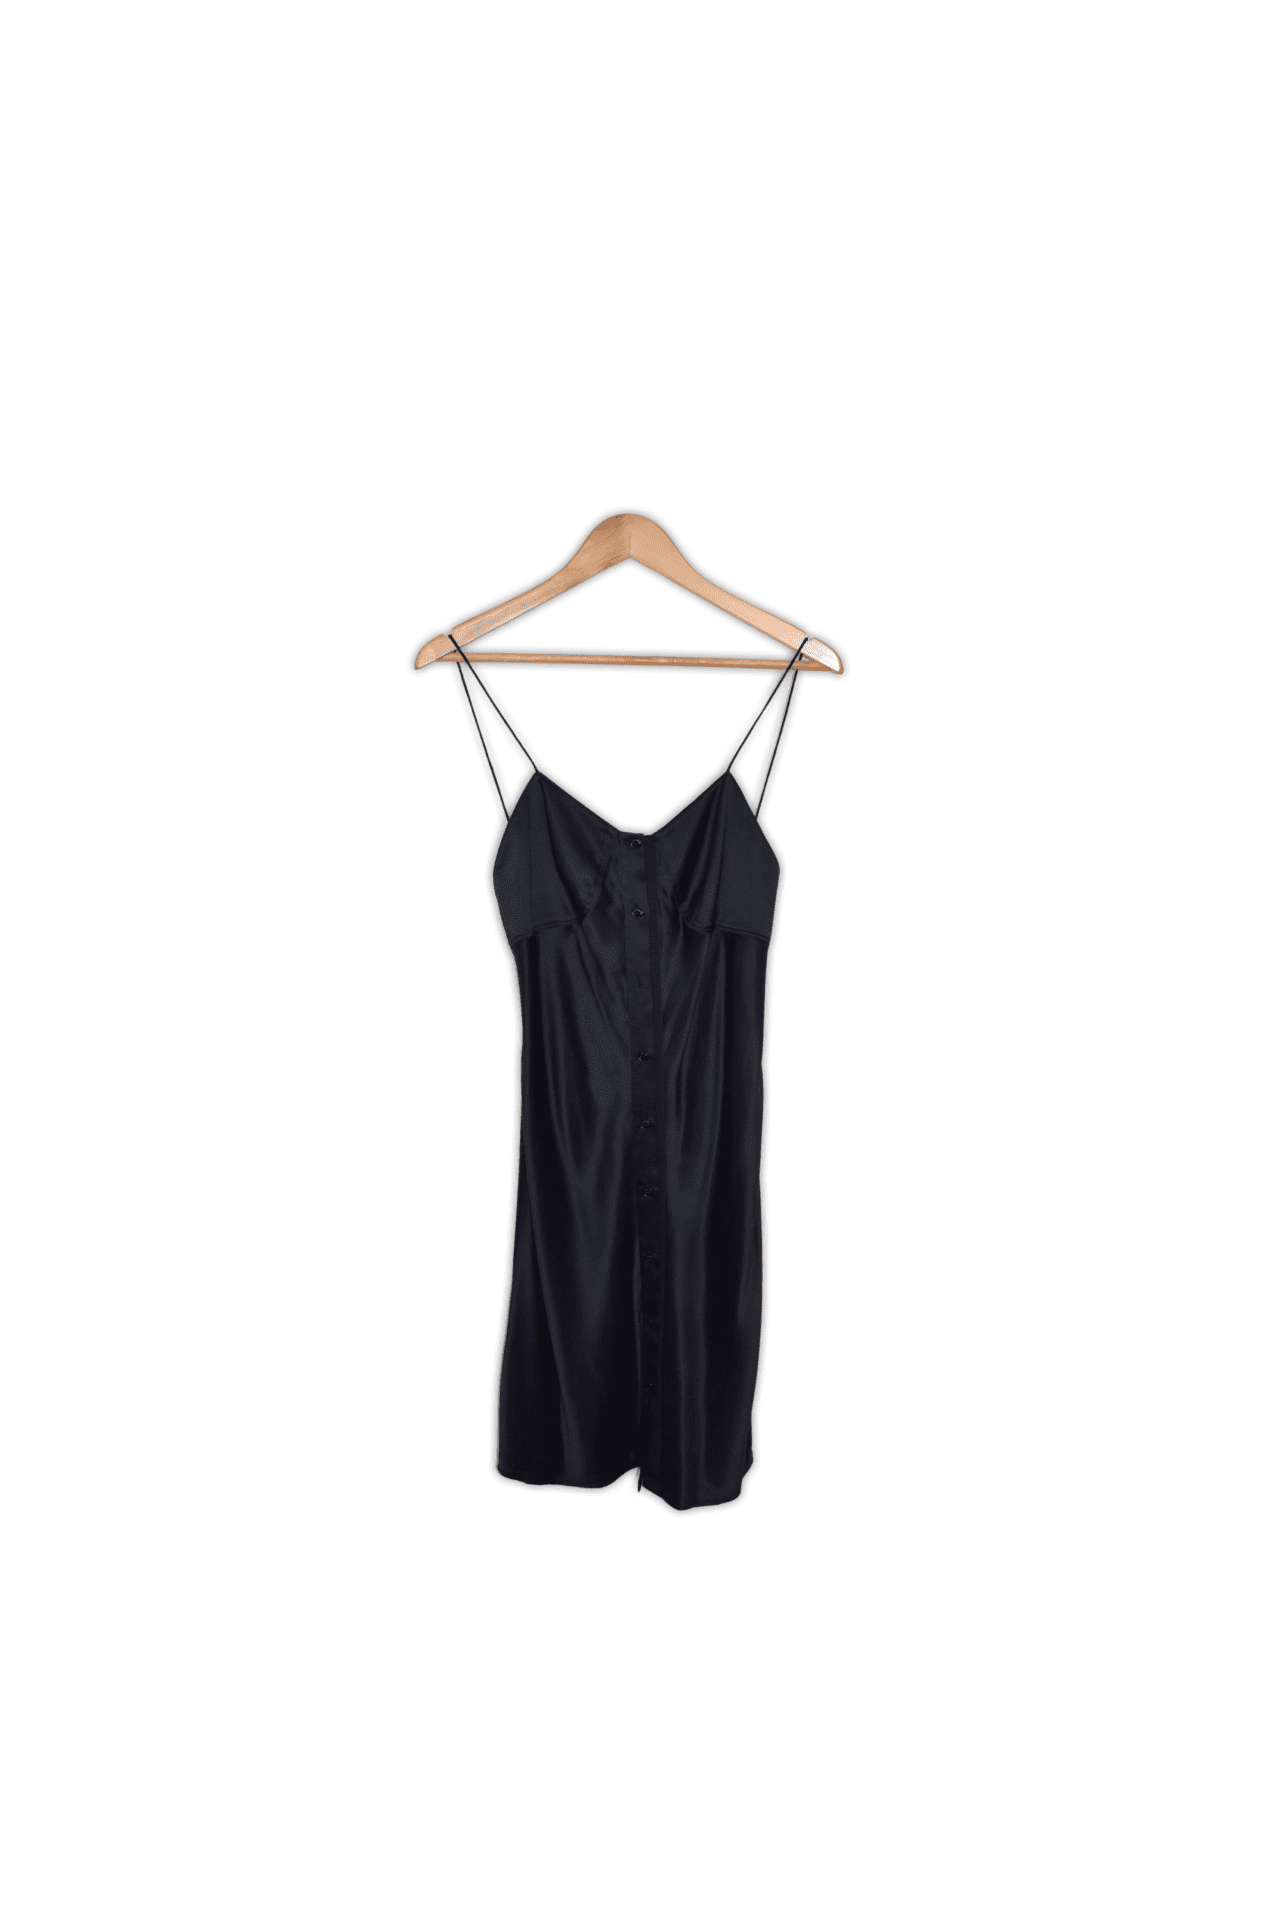 The slip dress is here to stay, but who says it needs to be basic? The Lois Dress by Rag & Bone is far from it. The slinky silk feel is familiar, but grosgrain lined buttons add an air of modernity to the style. XS US 4 black